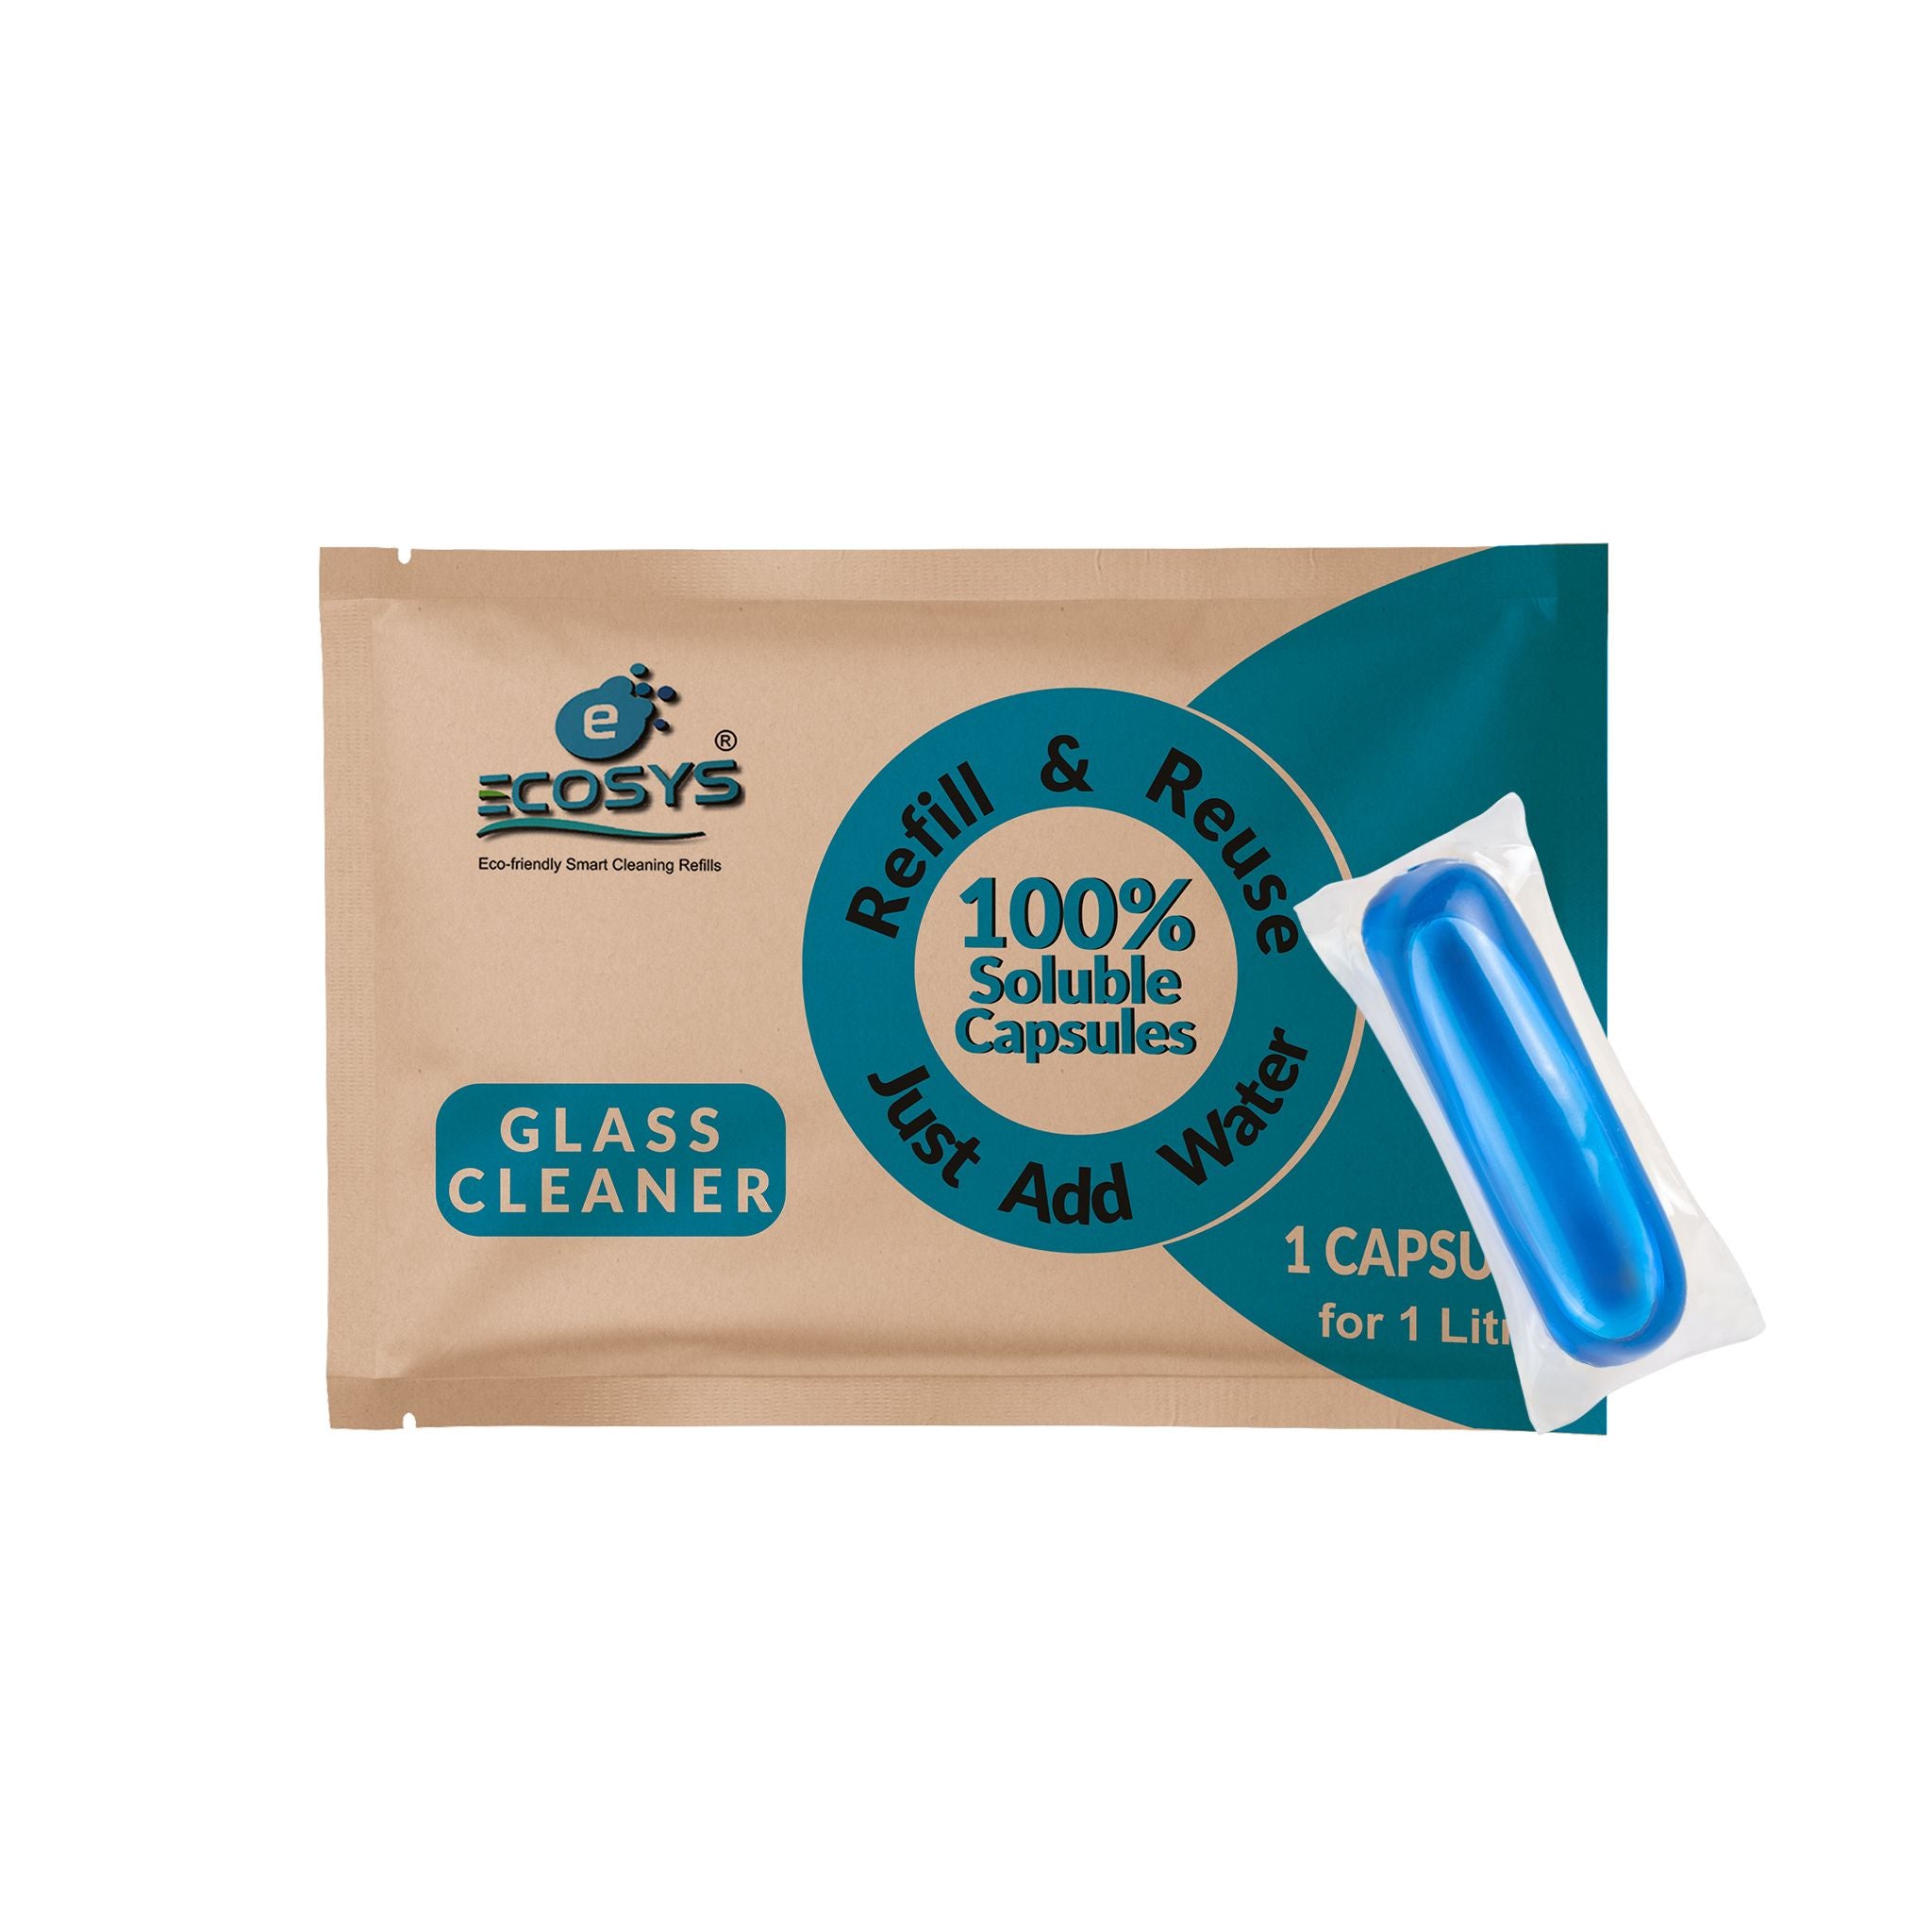 Ecosys Glass Cleaner I 2X more shine with booster I Streak-free & anti-static I 5 litres